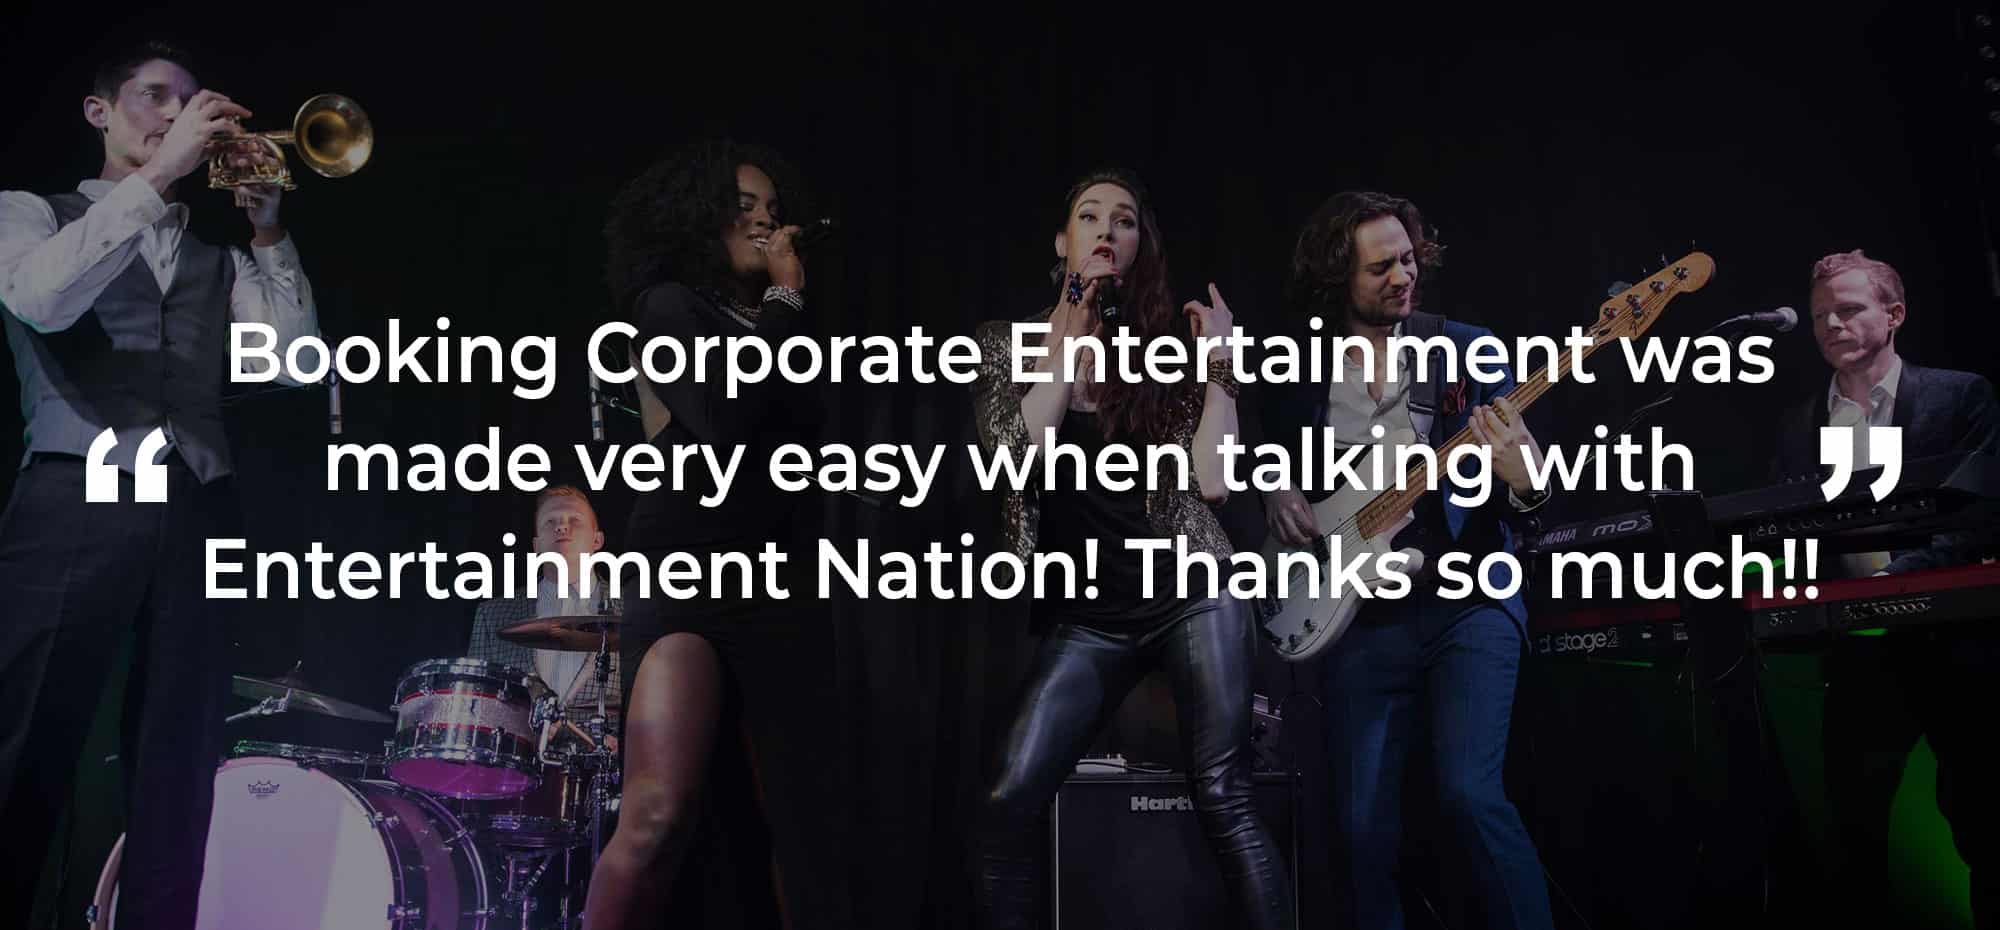 Client Review of Corporate Entertainment Greater Manchester